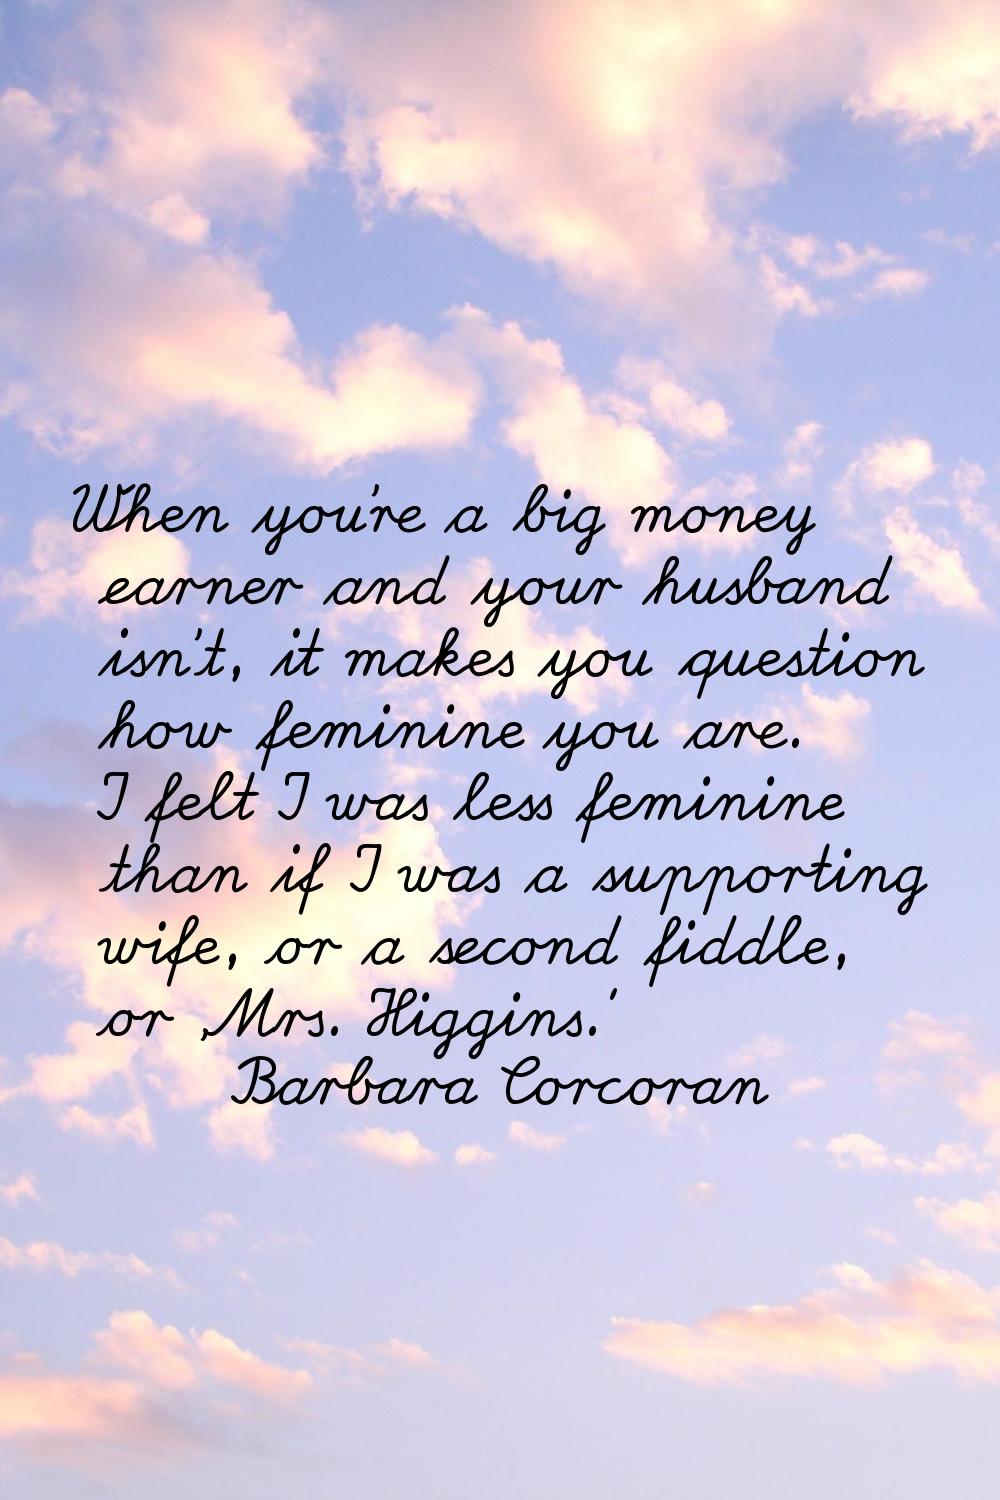 When you're a big money earner and your husband isn't, it makes you question how feminine you are. 